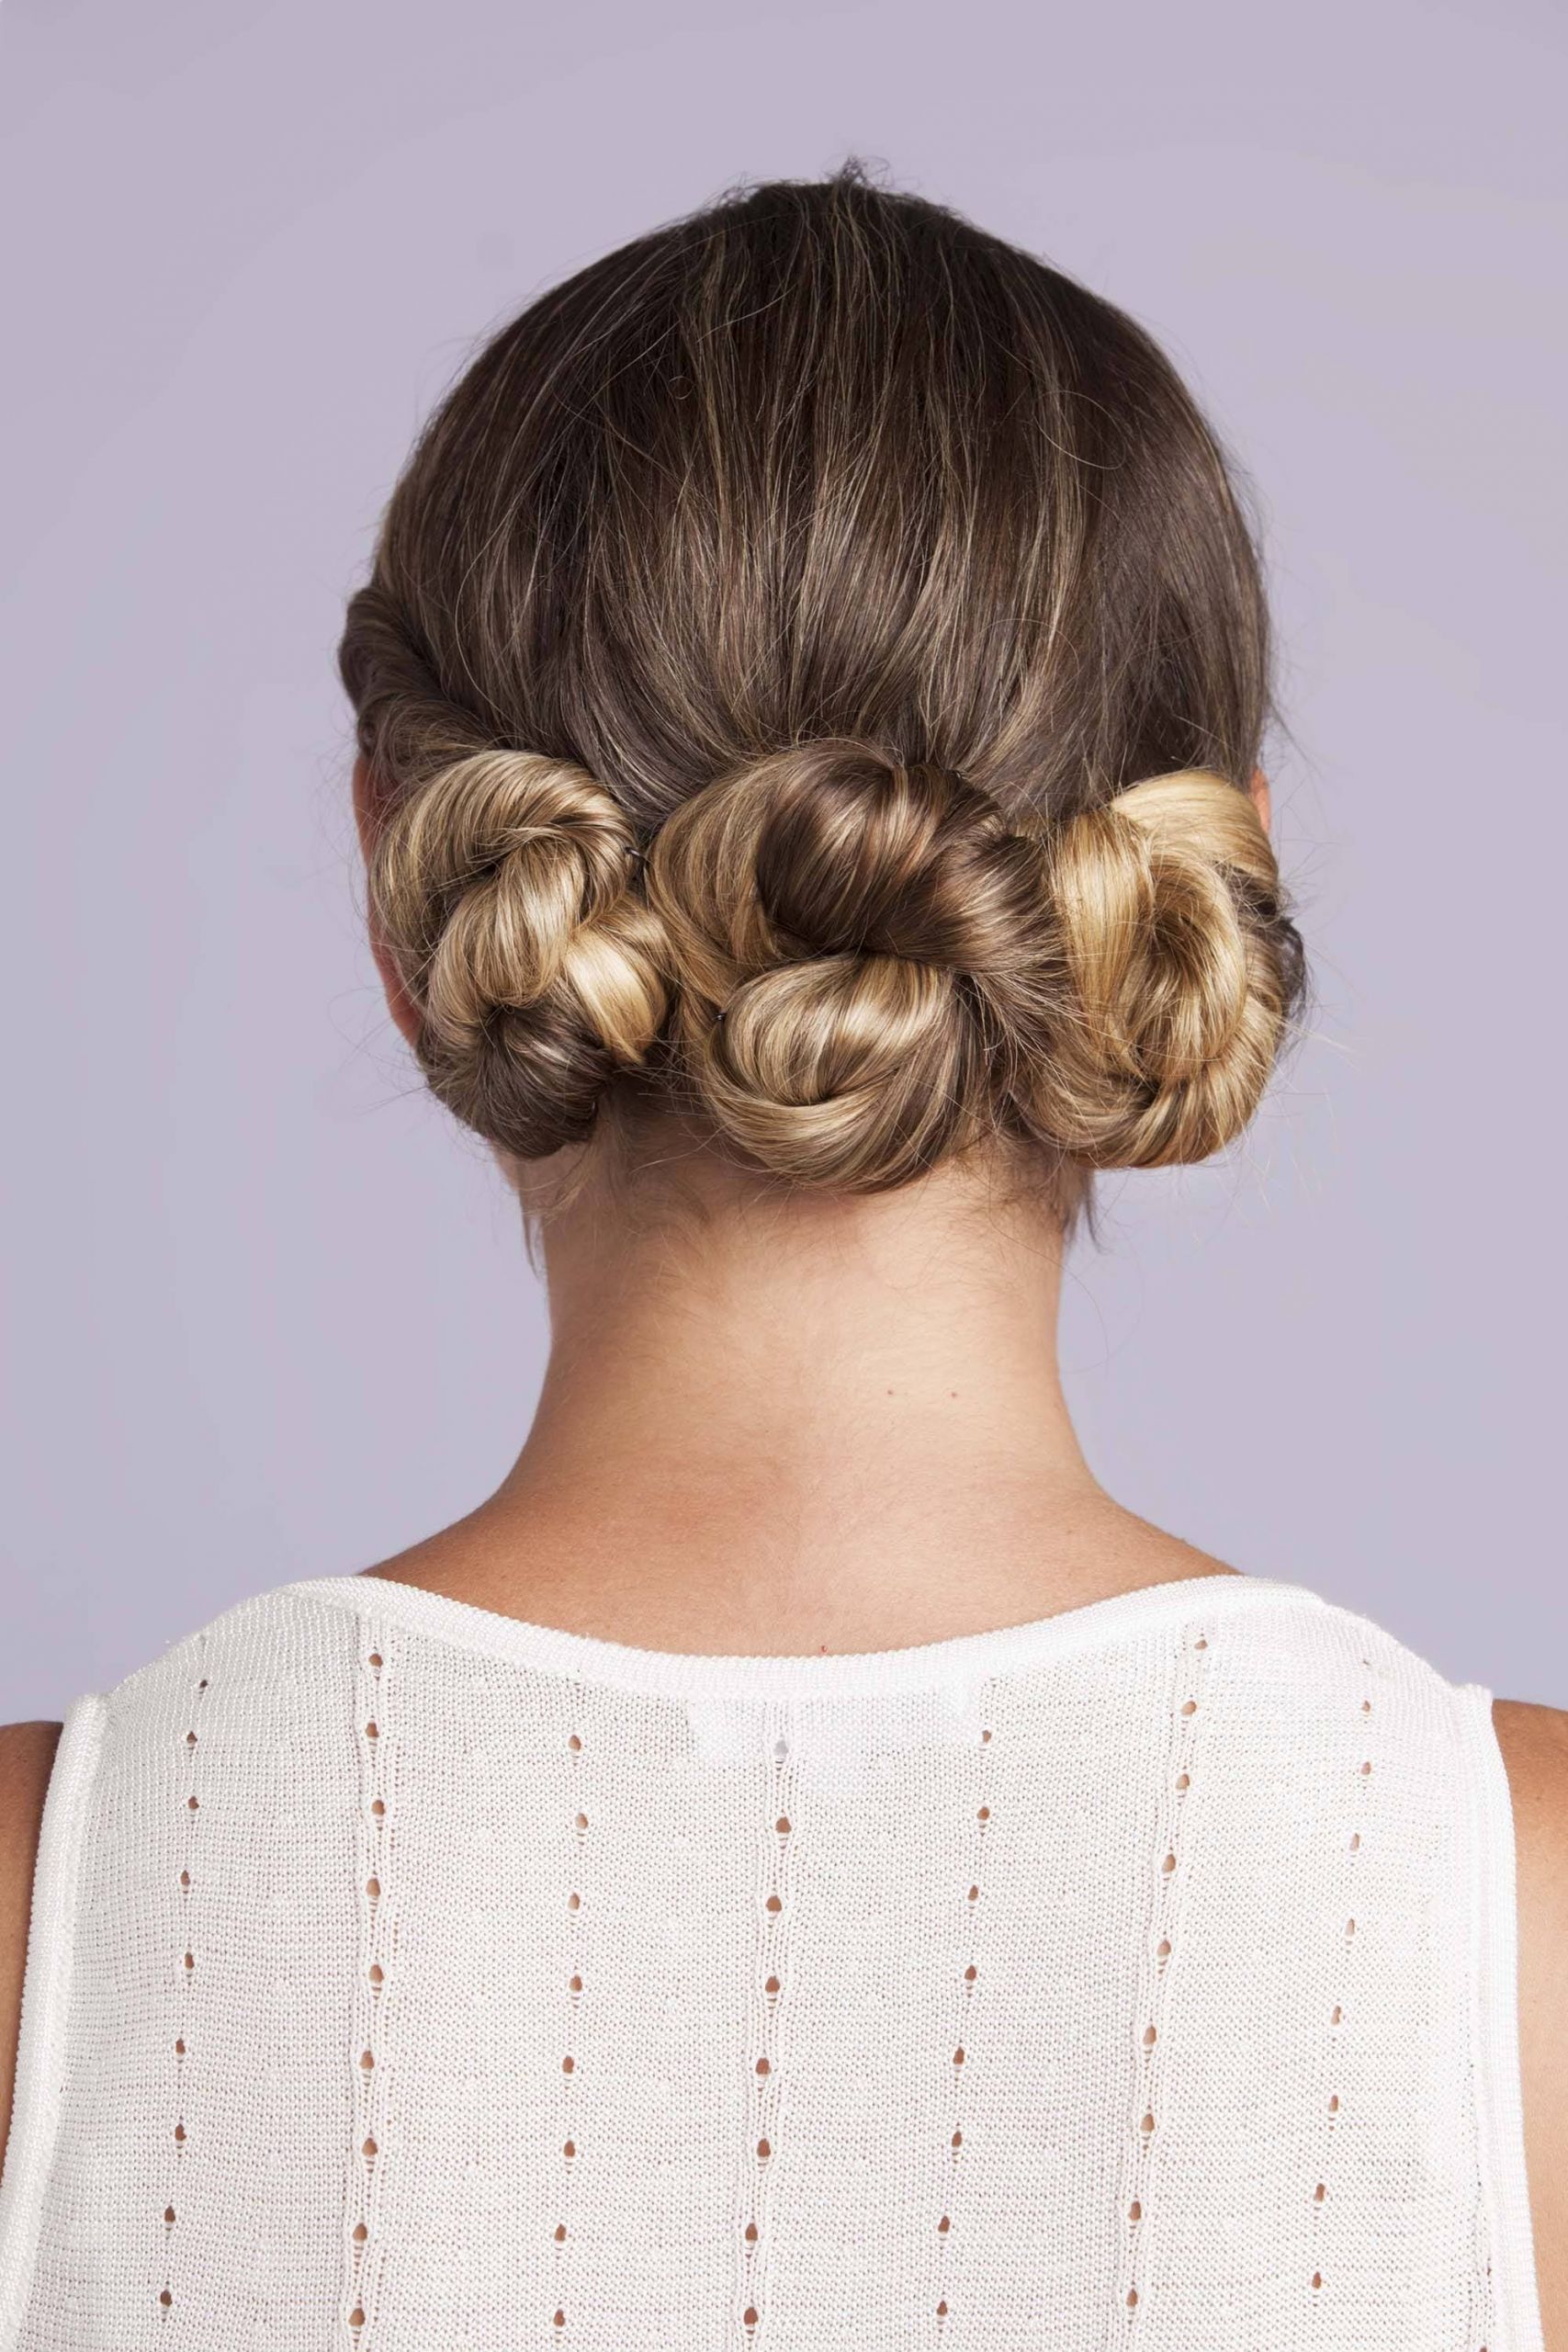 Wedding Buns Hairstyles
 14 Chic Wedding Hairstyles for Short Hair